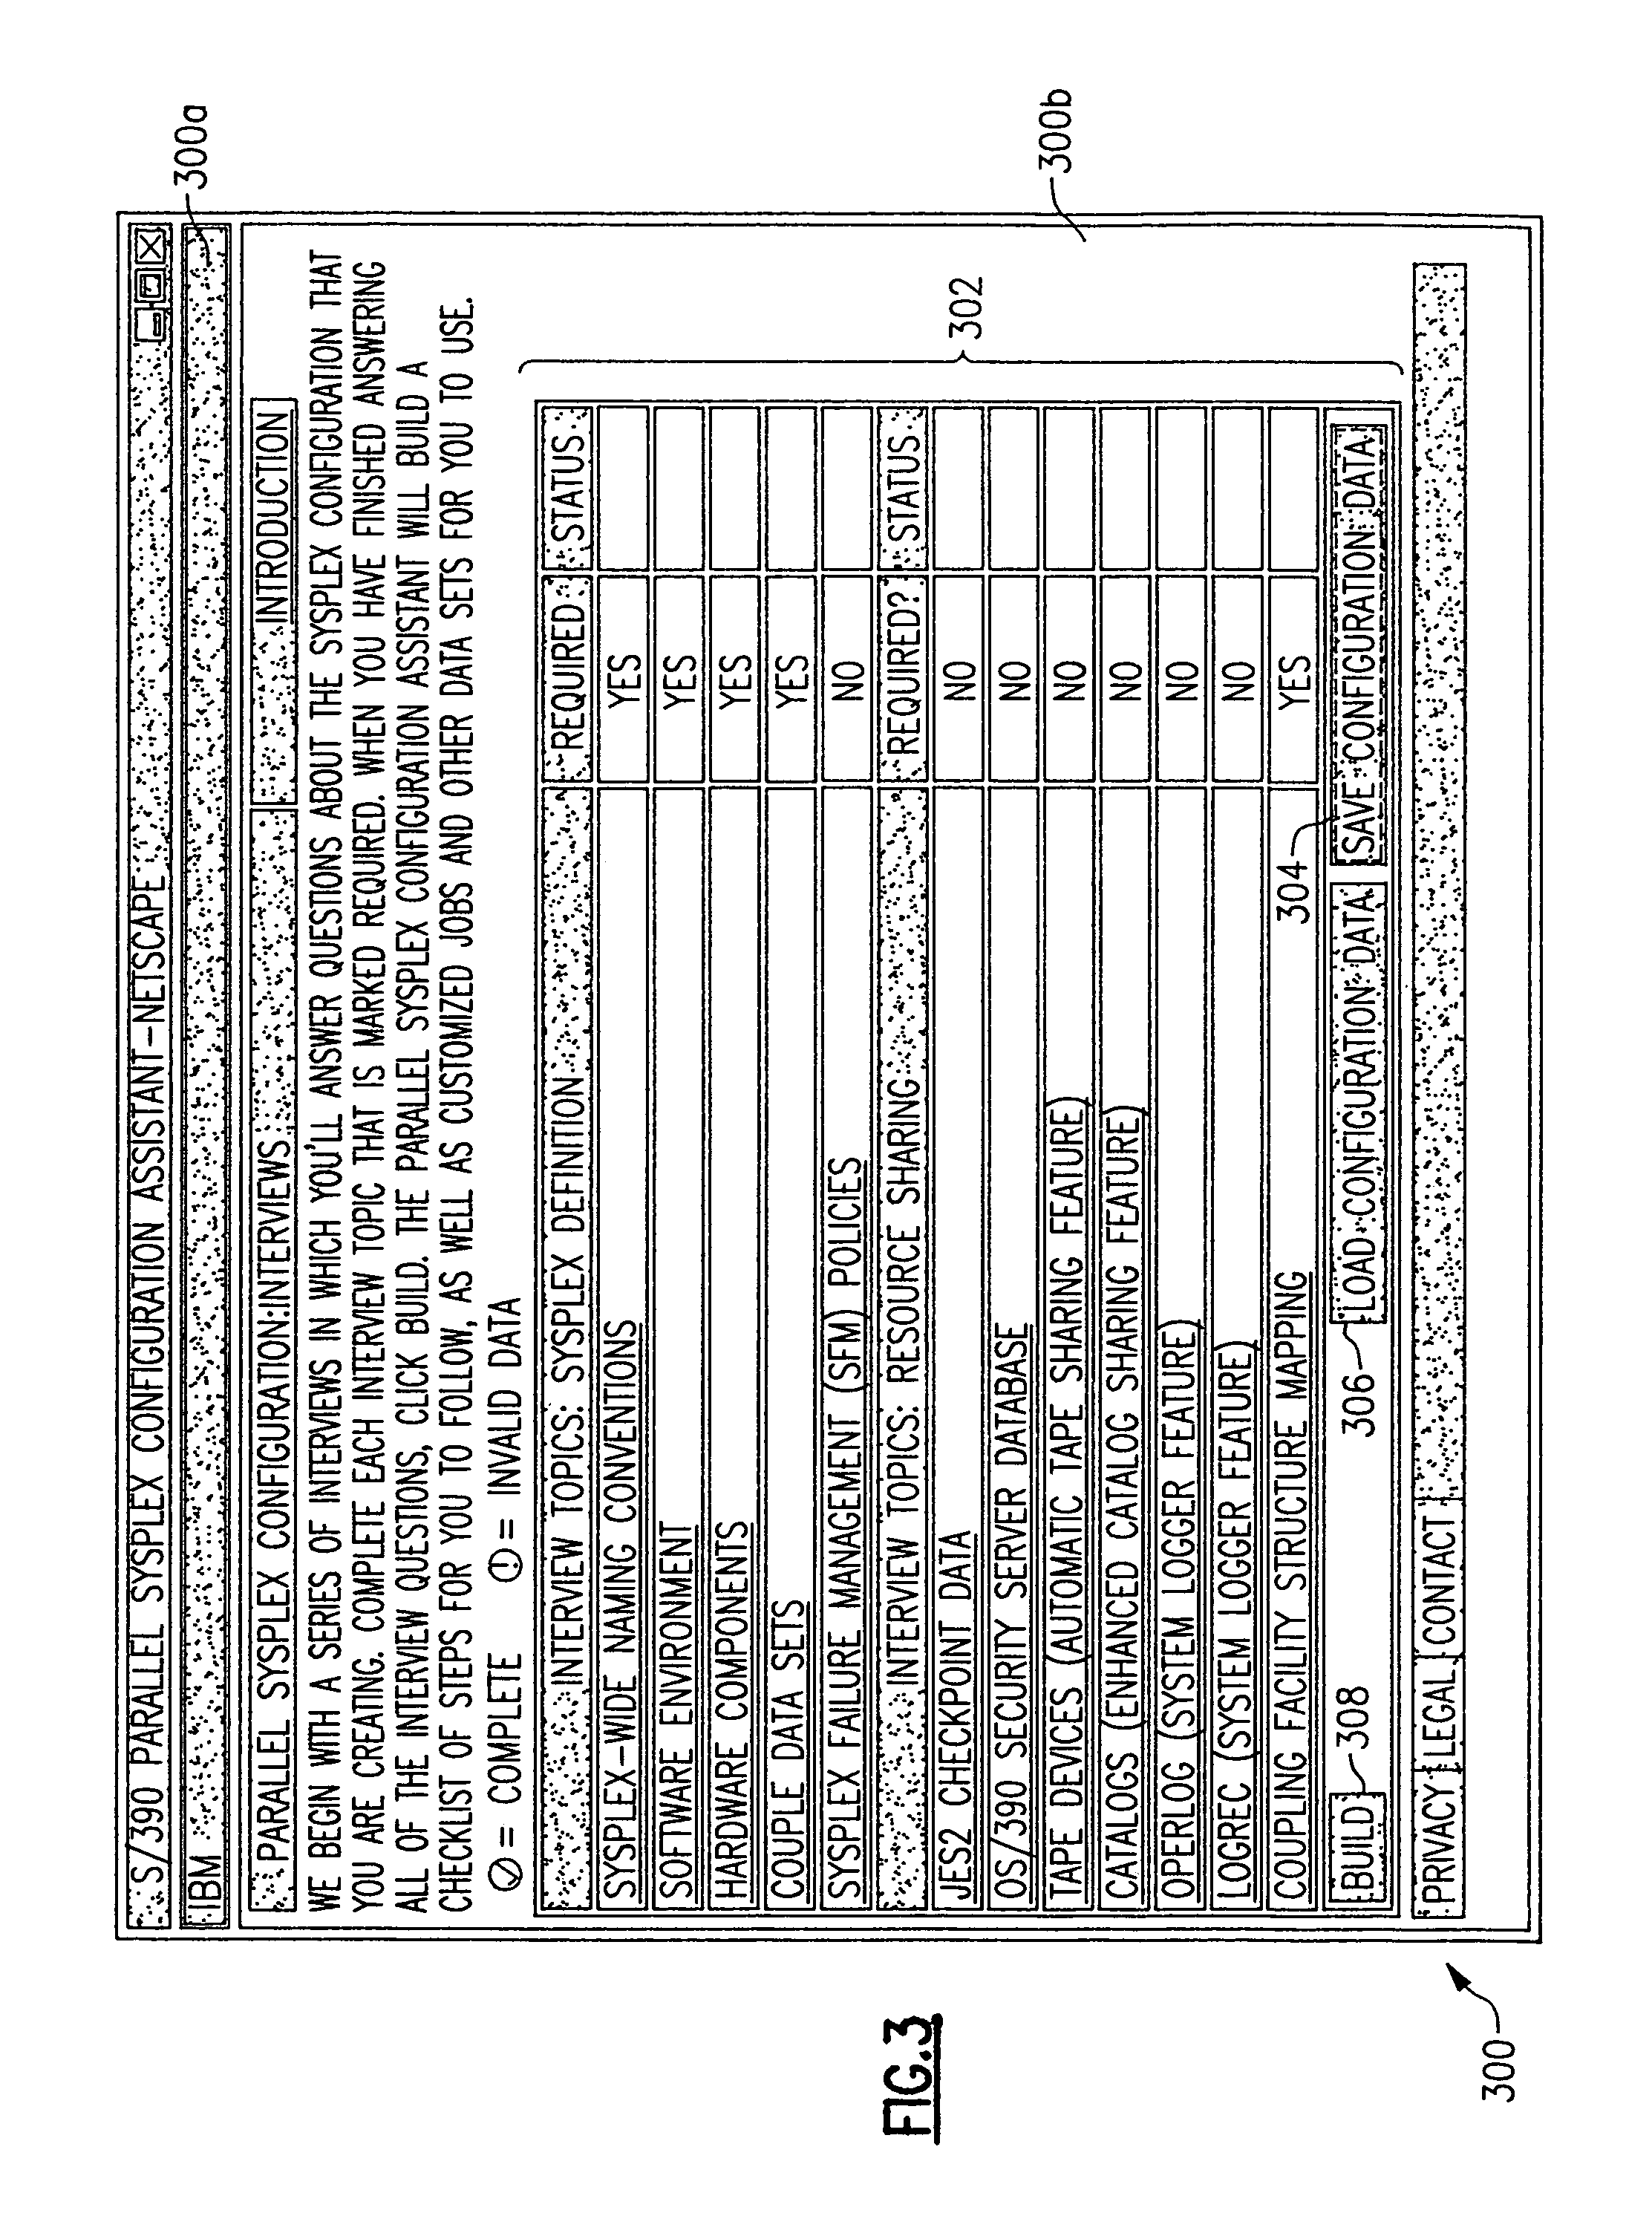 Method and apparatus for providing local data persistence for web applications